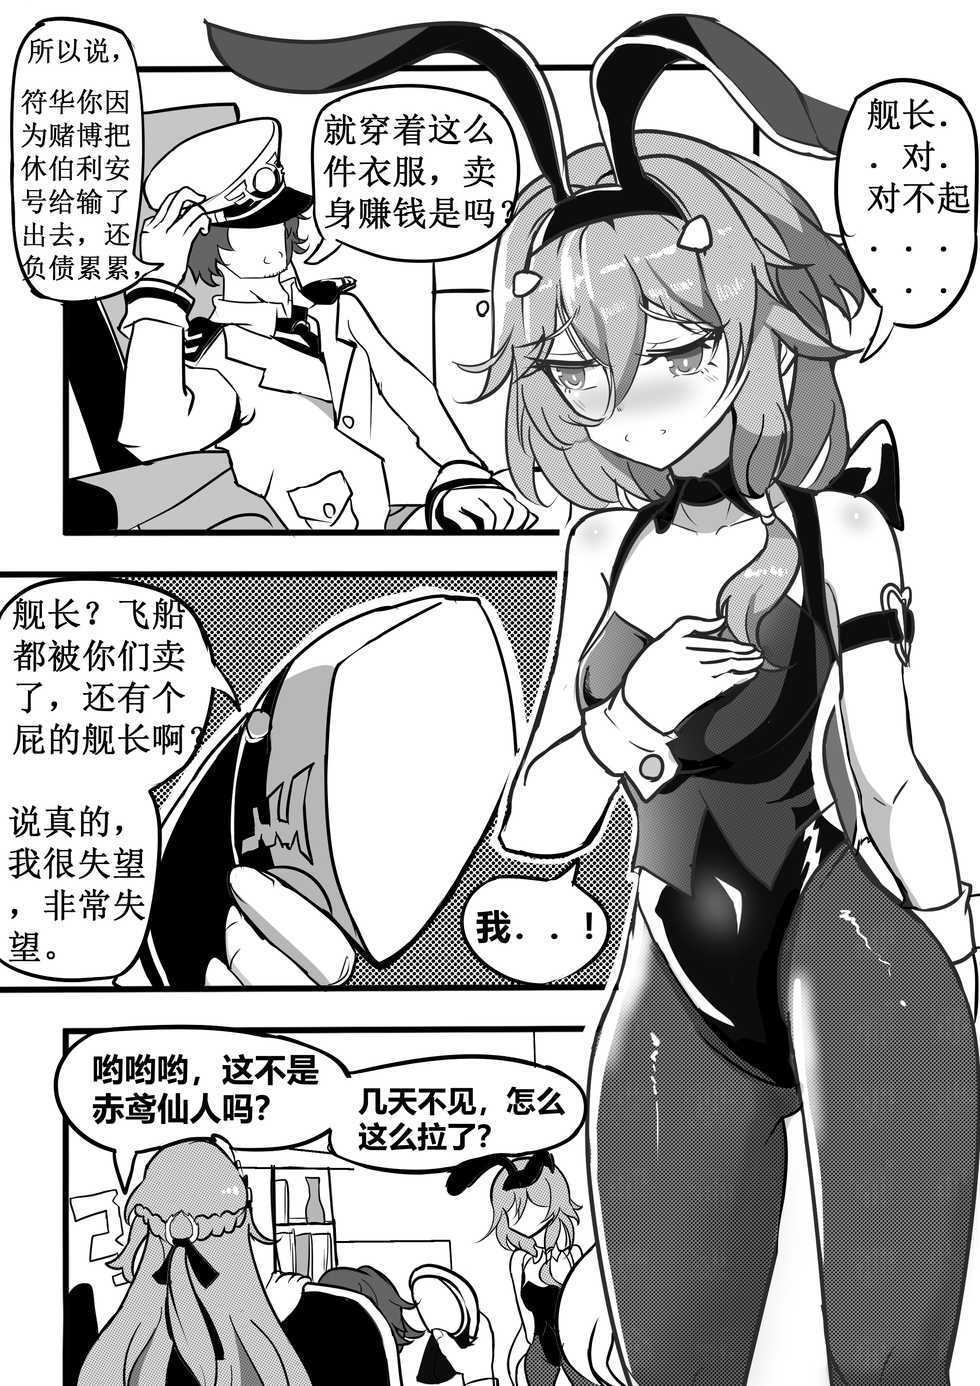 (White Bank) Collapse 1-6 (Honkai Impact 3rd) [Chinese] - Page 37